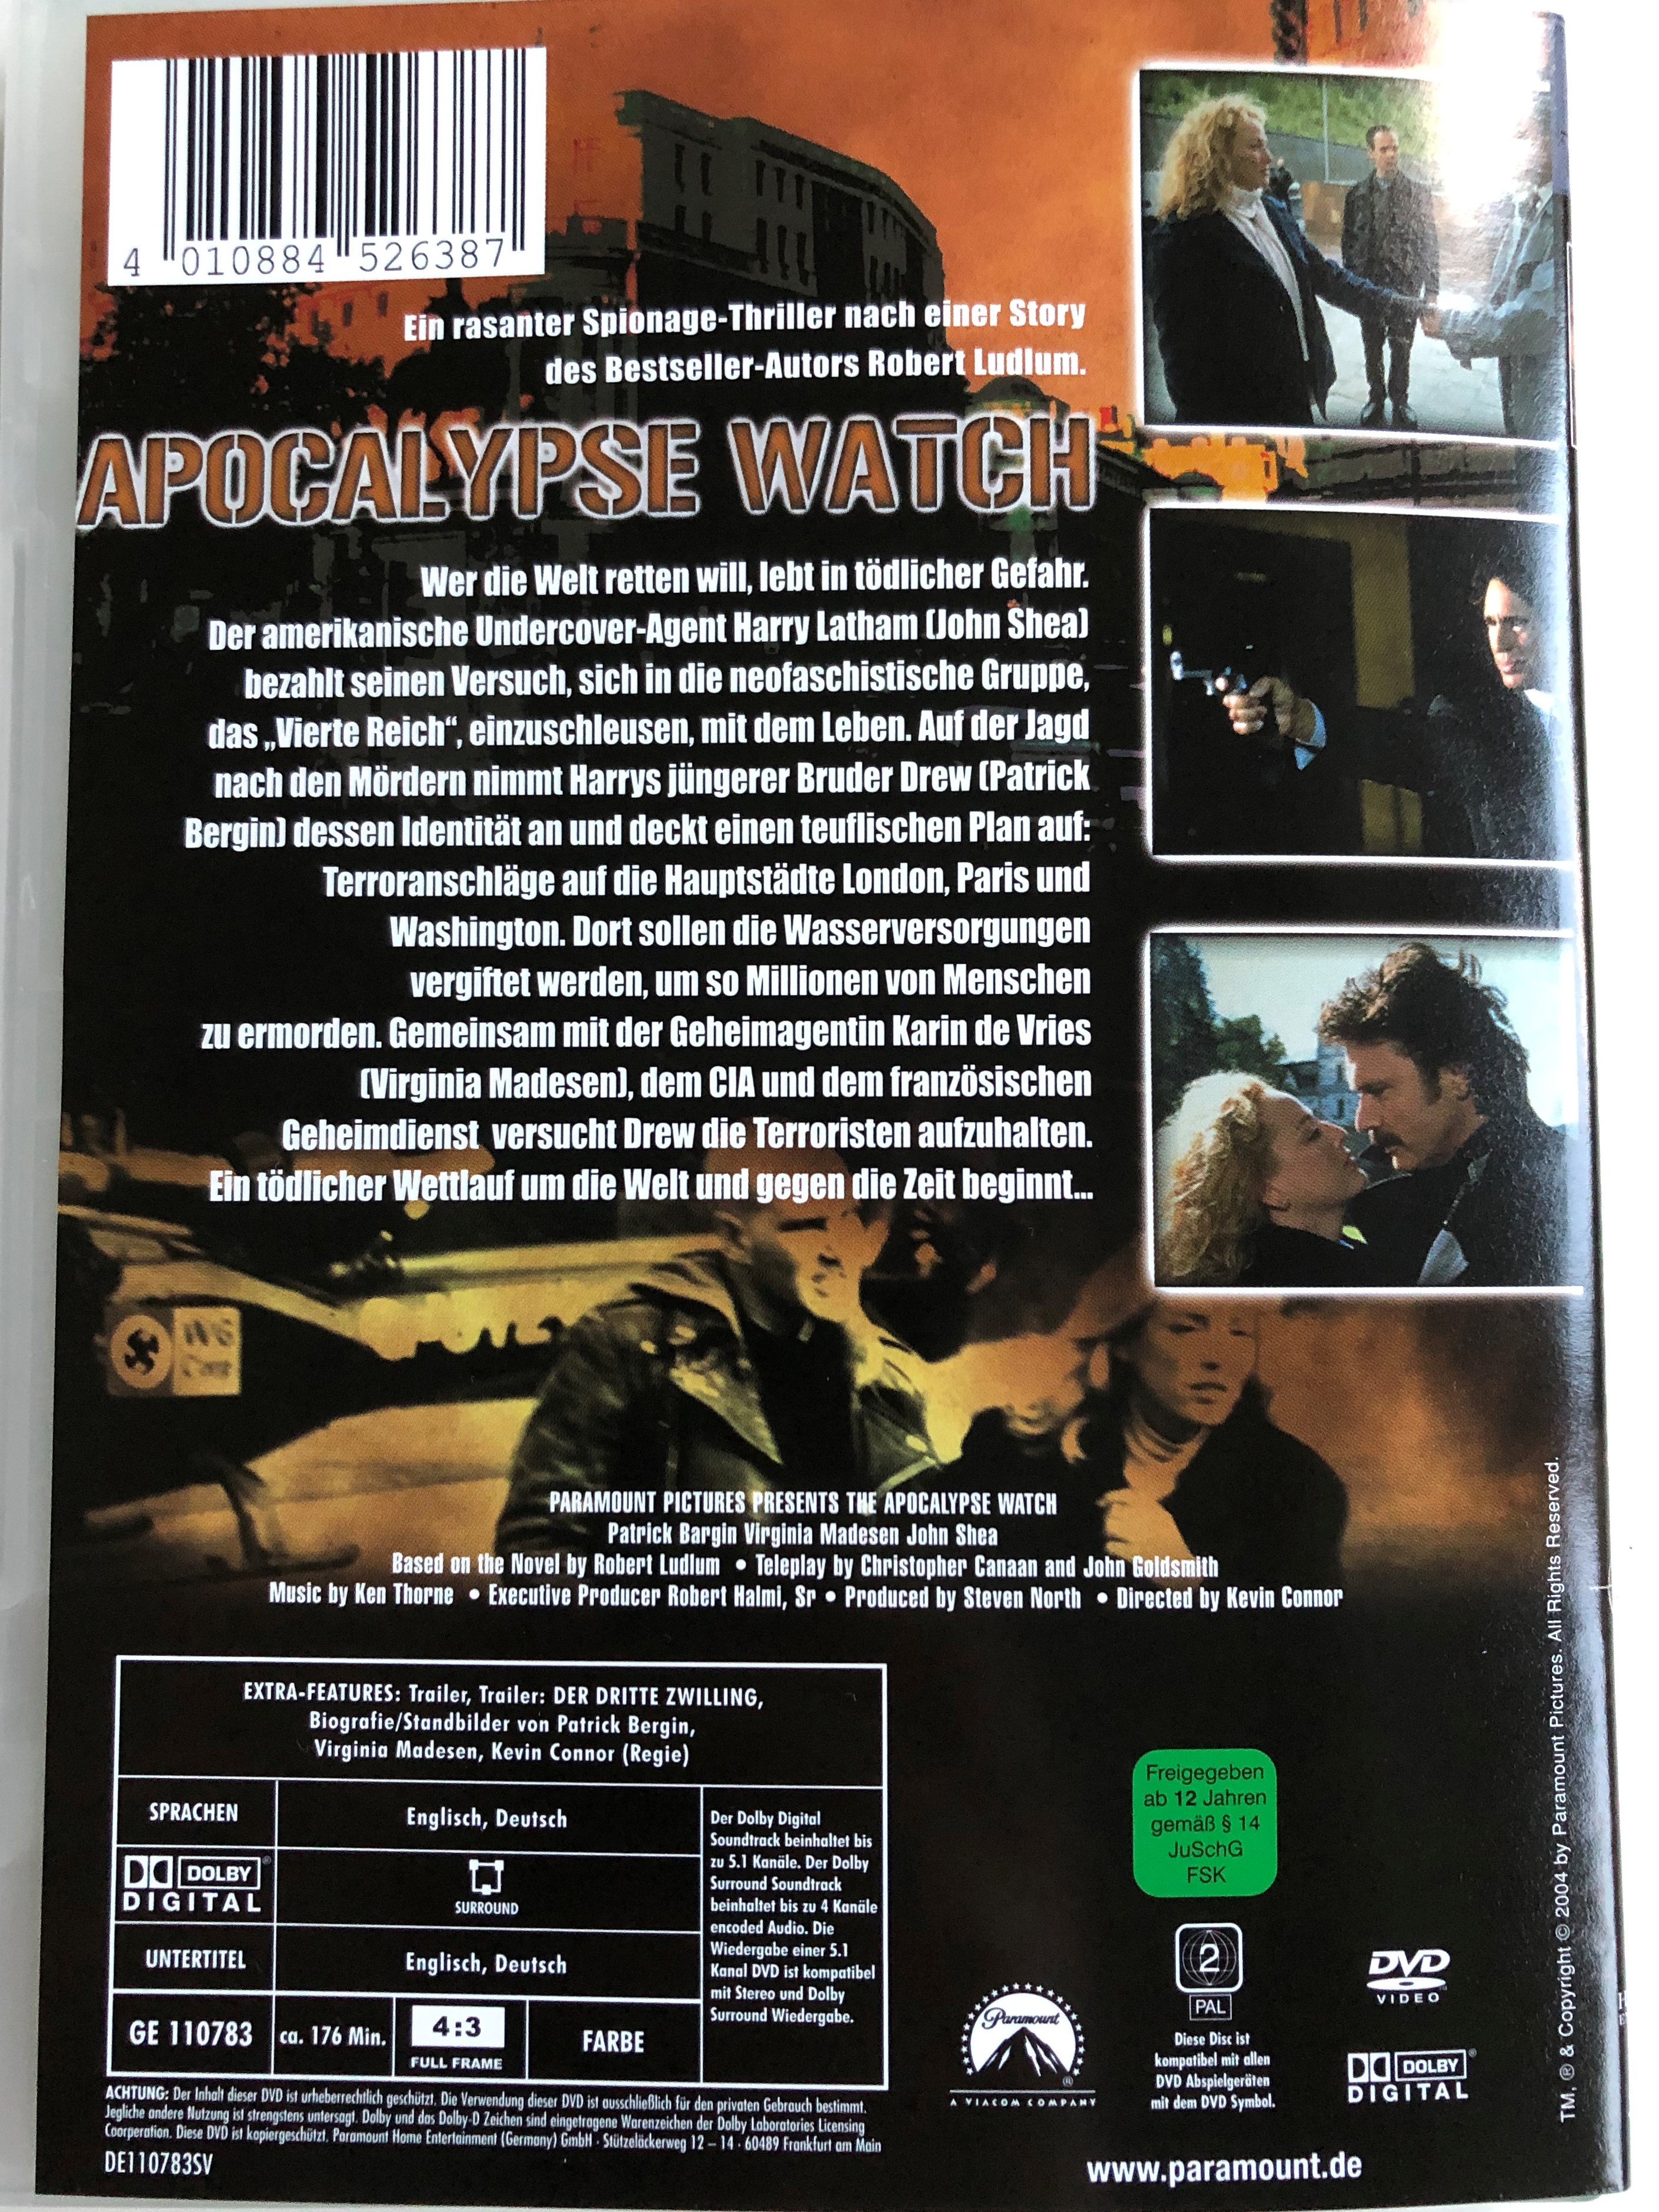 apocalypse-watch-dvd-1997-directed-by-kevin-connor-2.jpg